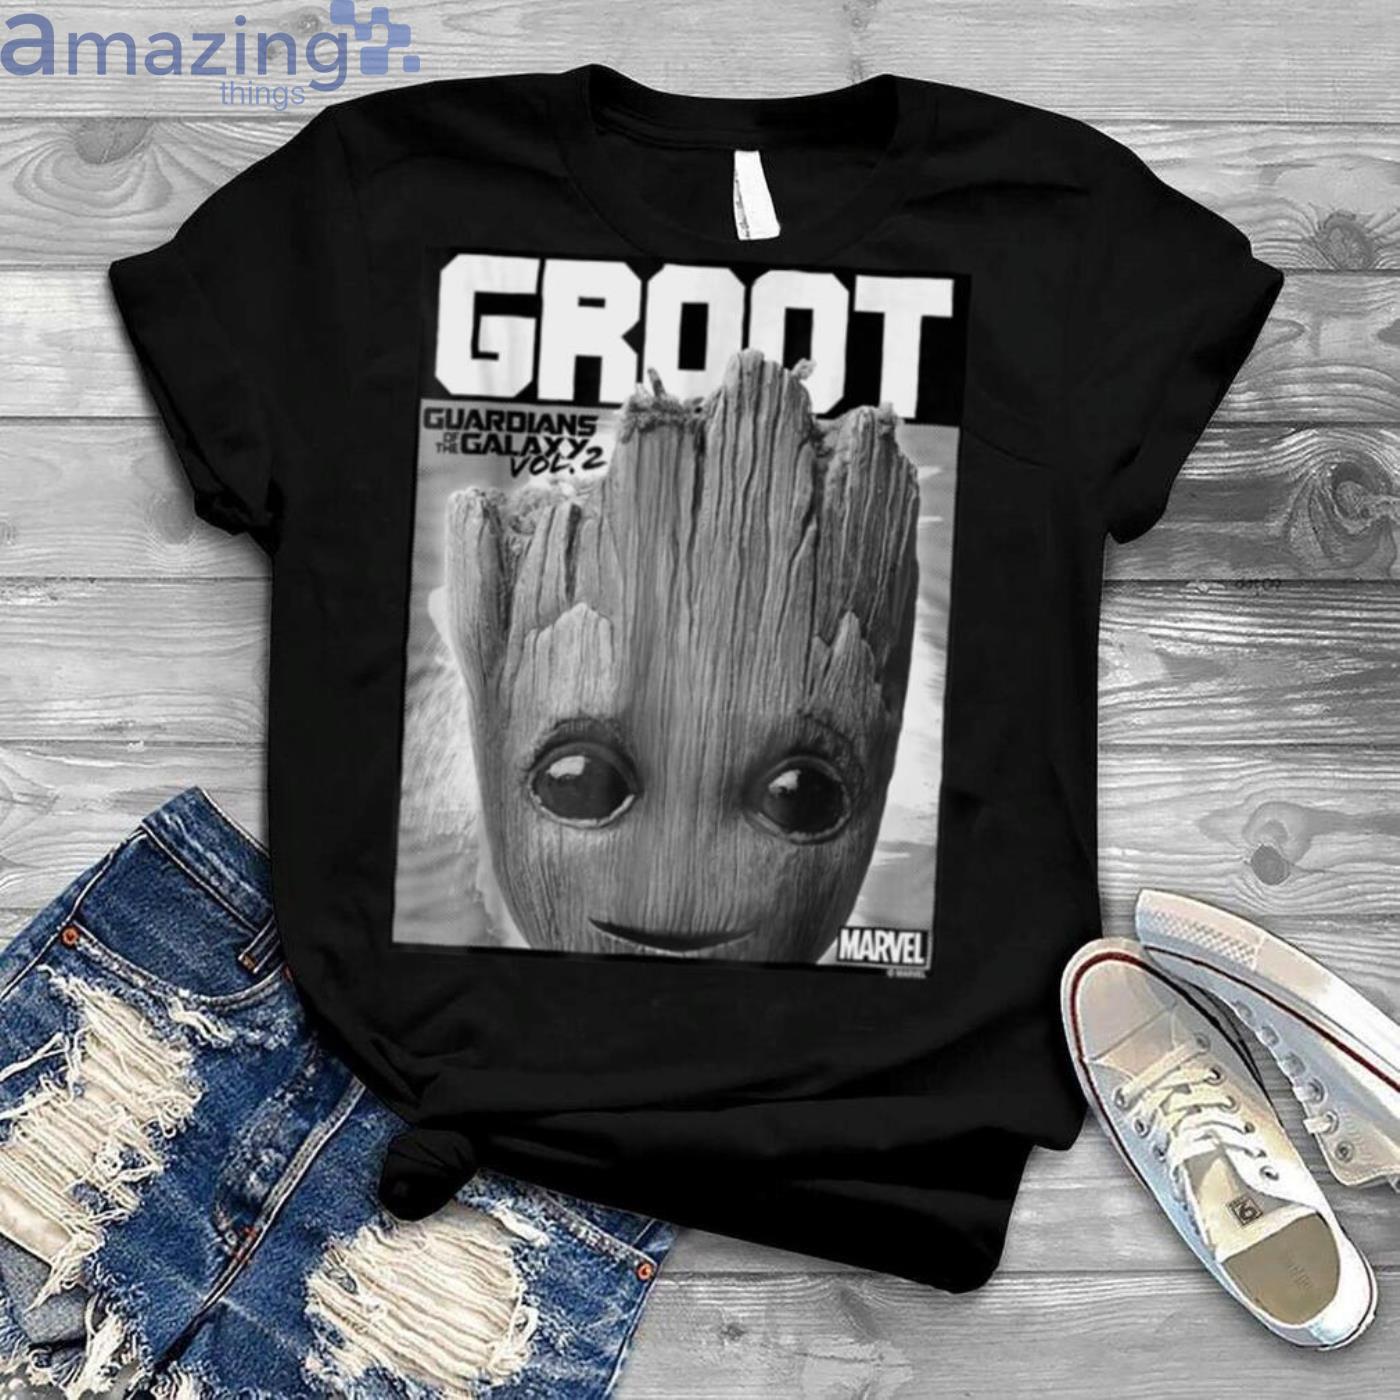 Marvel Guardians Baby Groot Close Up Graphic T Shirt Product Photo 1